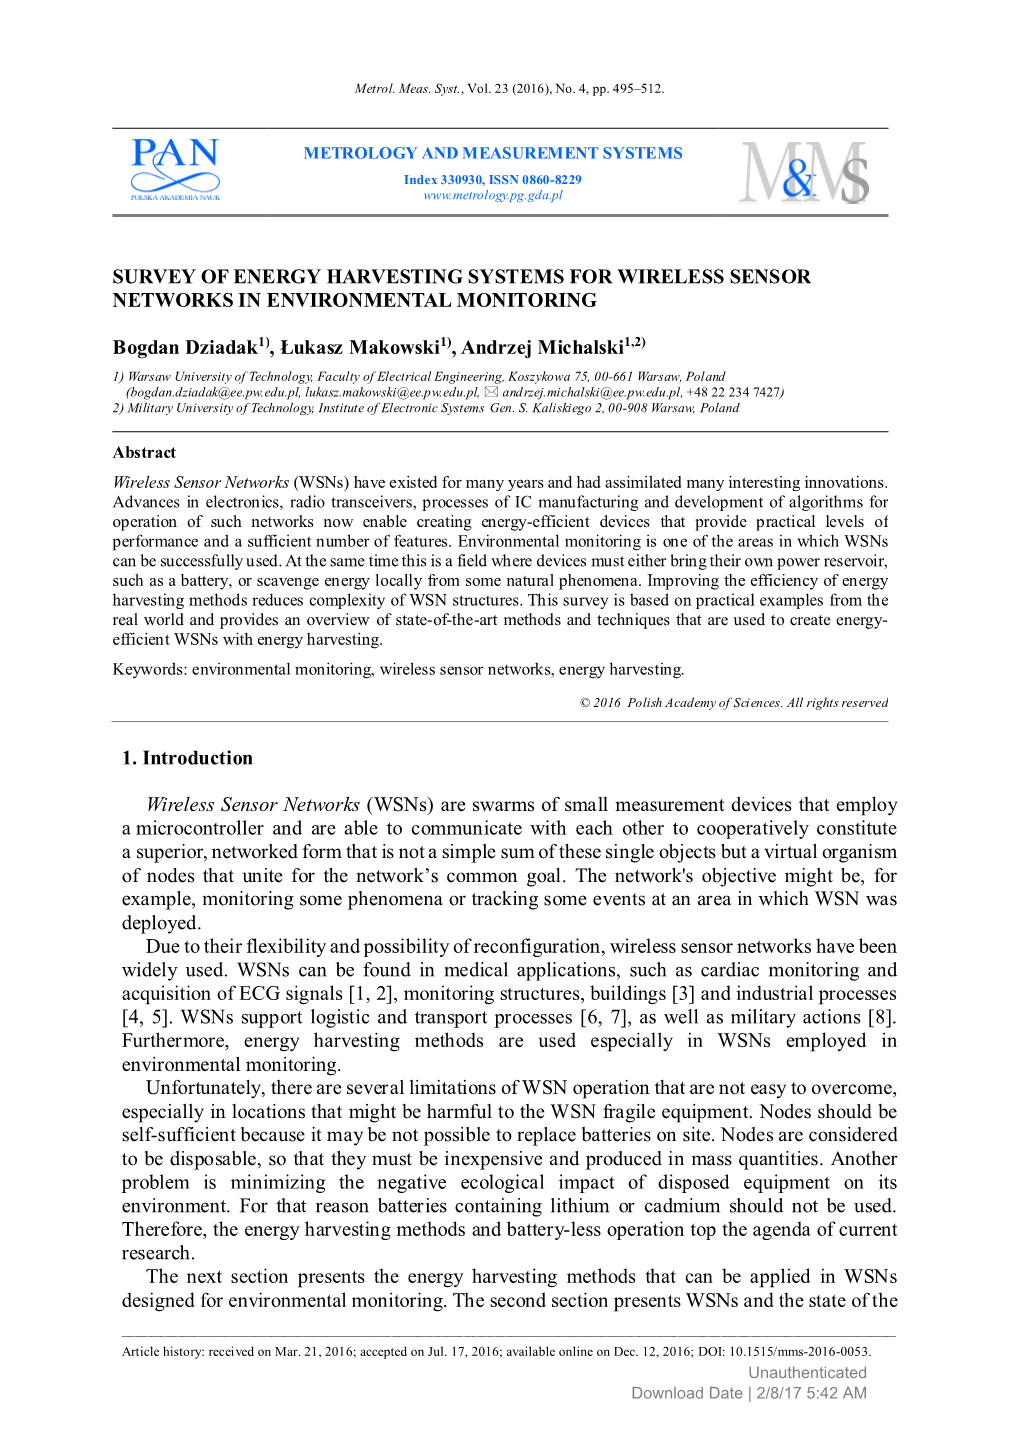 Survey of Energy Harvesting Systems for Wireless Sensor Networks in Environmental Monitoring